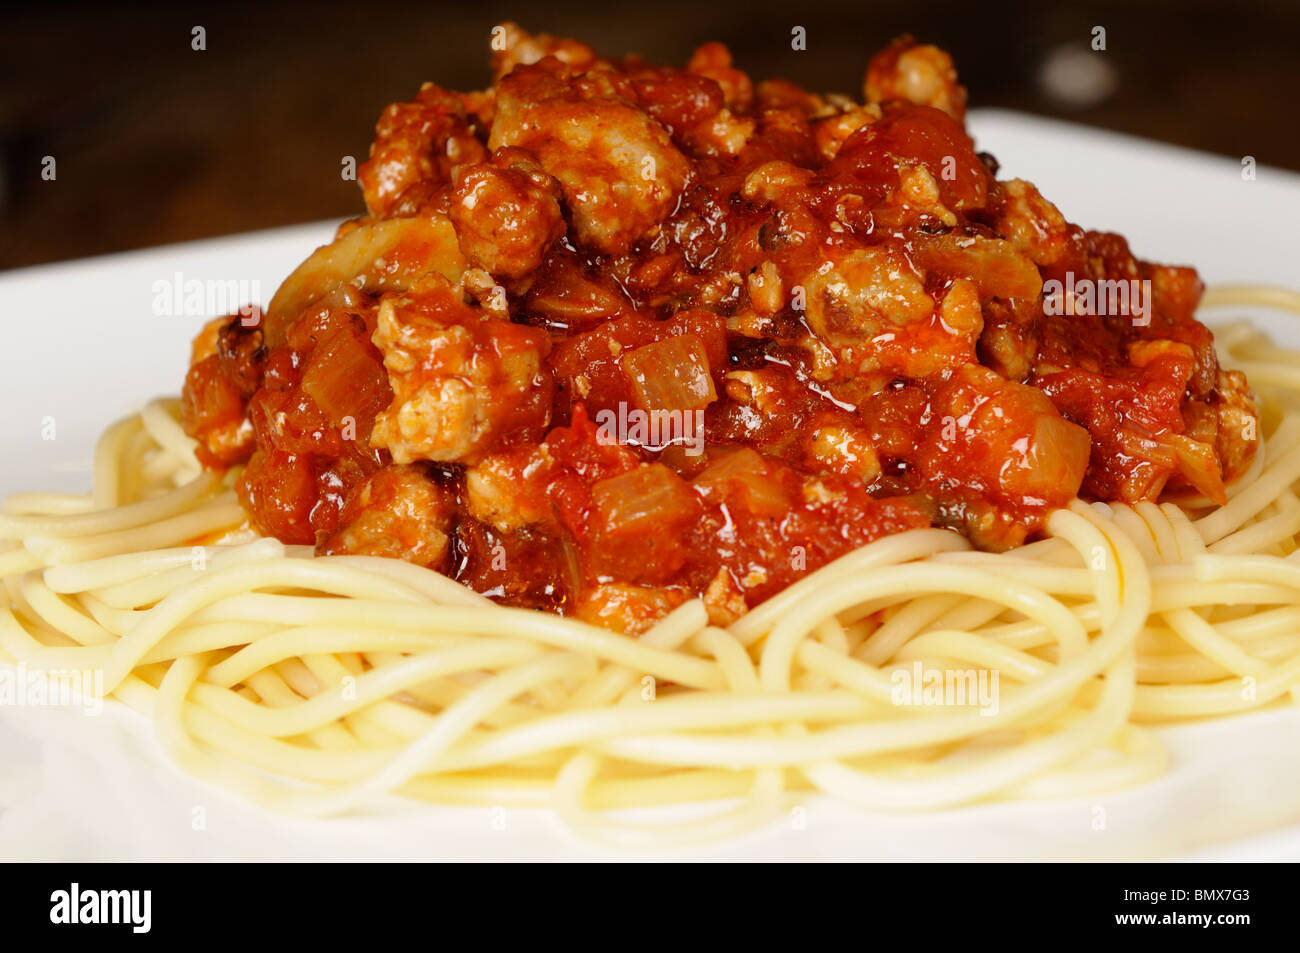 Stock photo of a pork based spaghetti bolognaise served on a white plate. Stock Photo